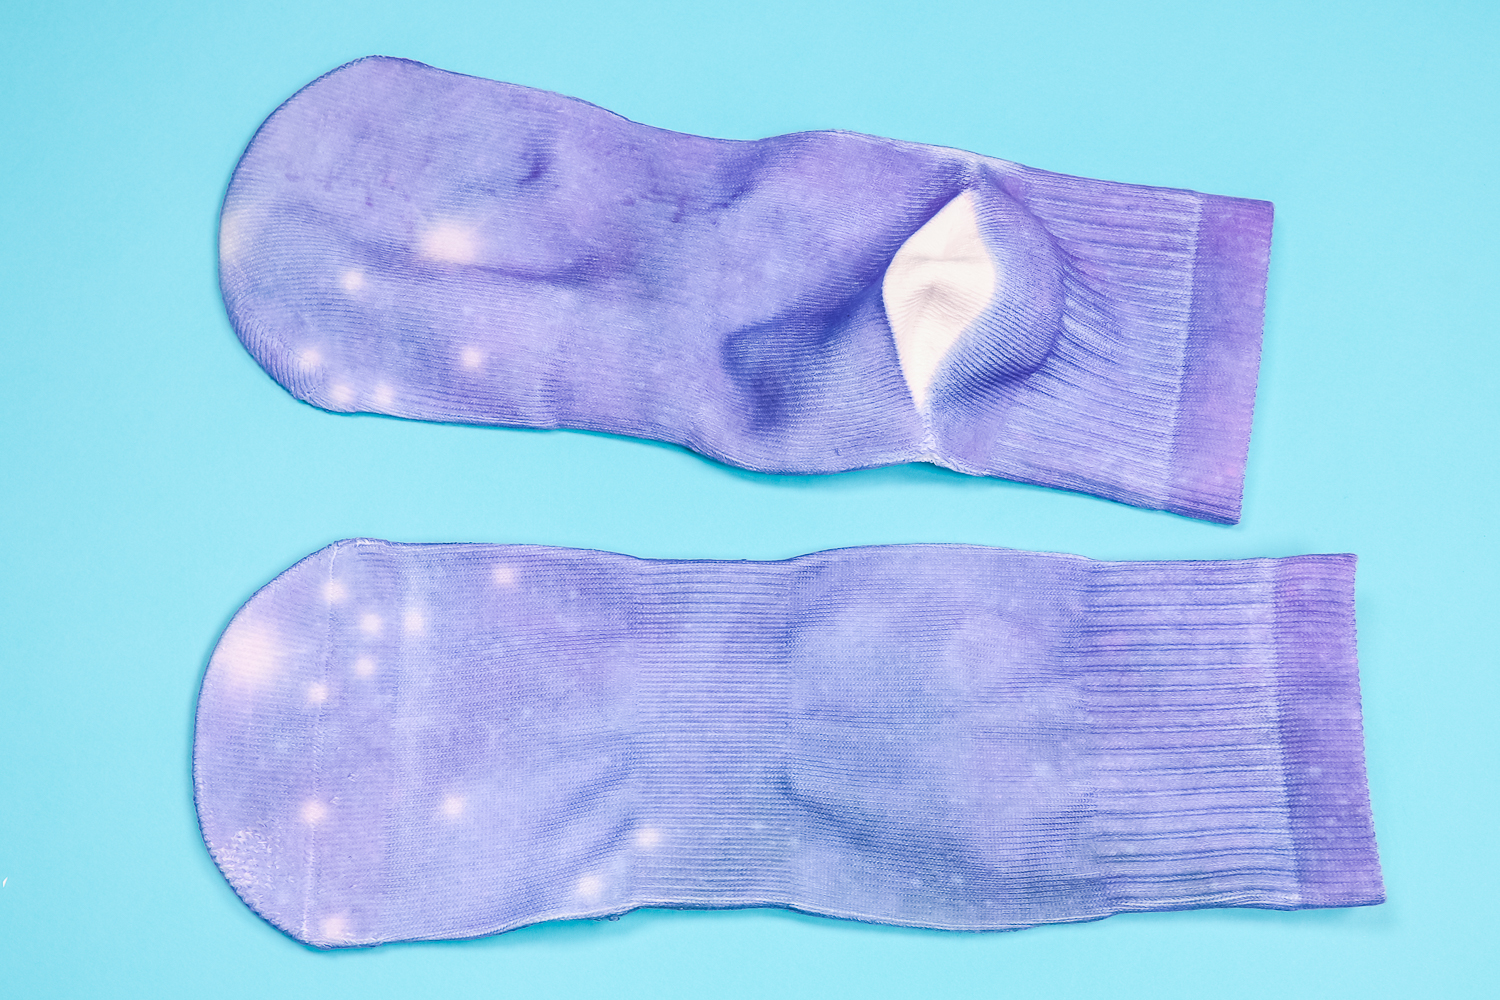 Finished galaxy sublimation ankle socks.